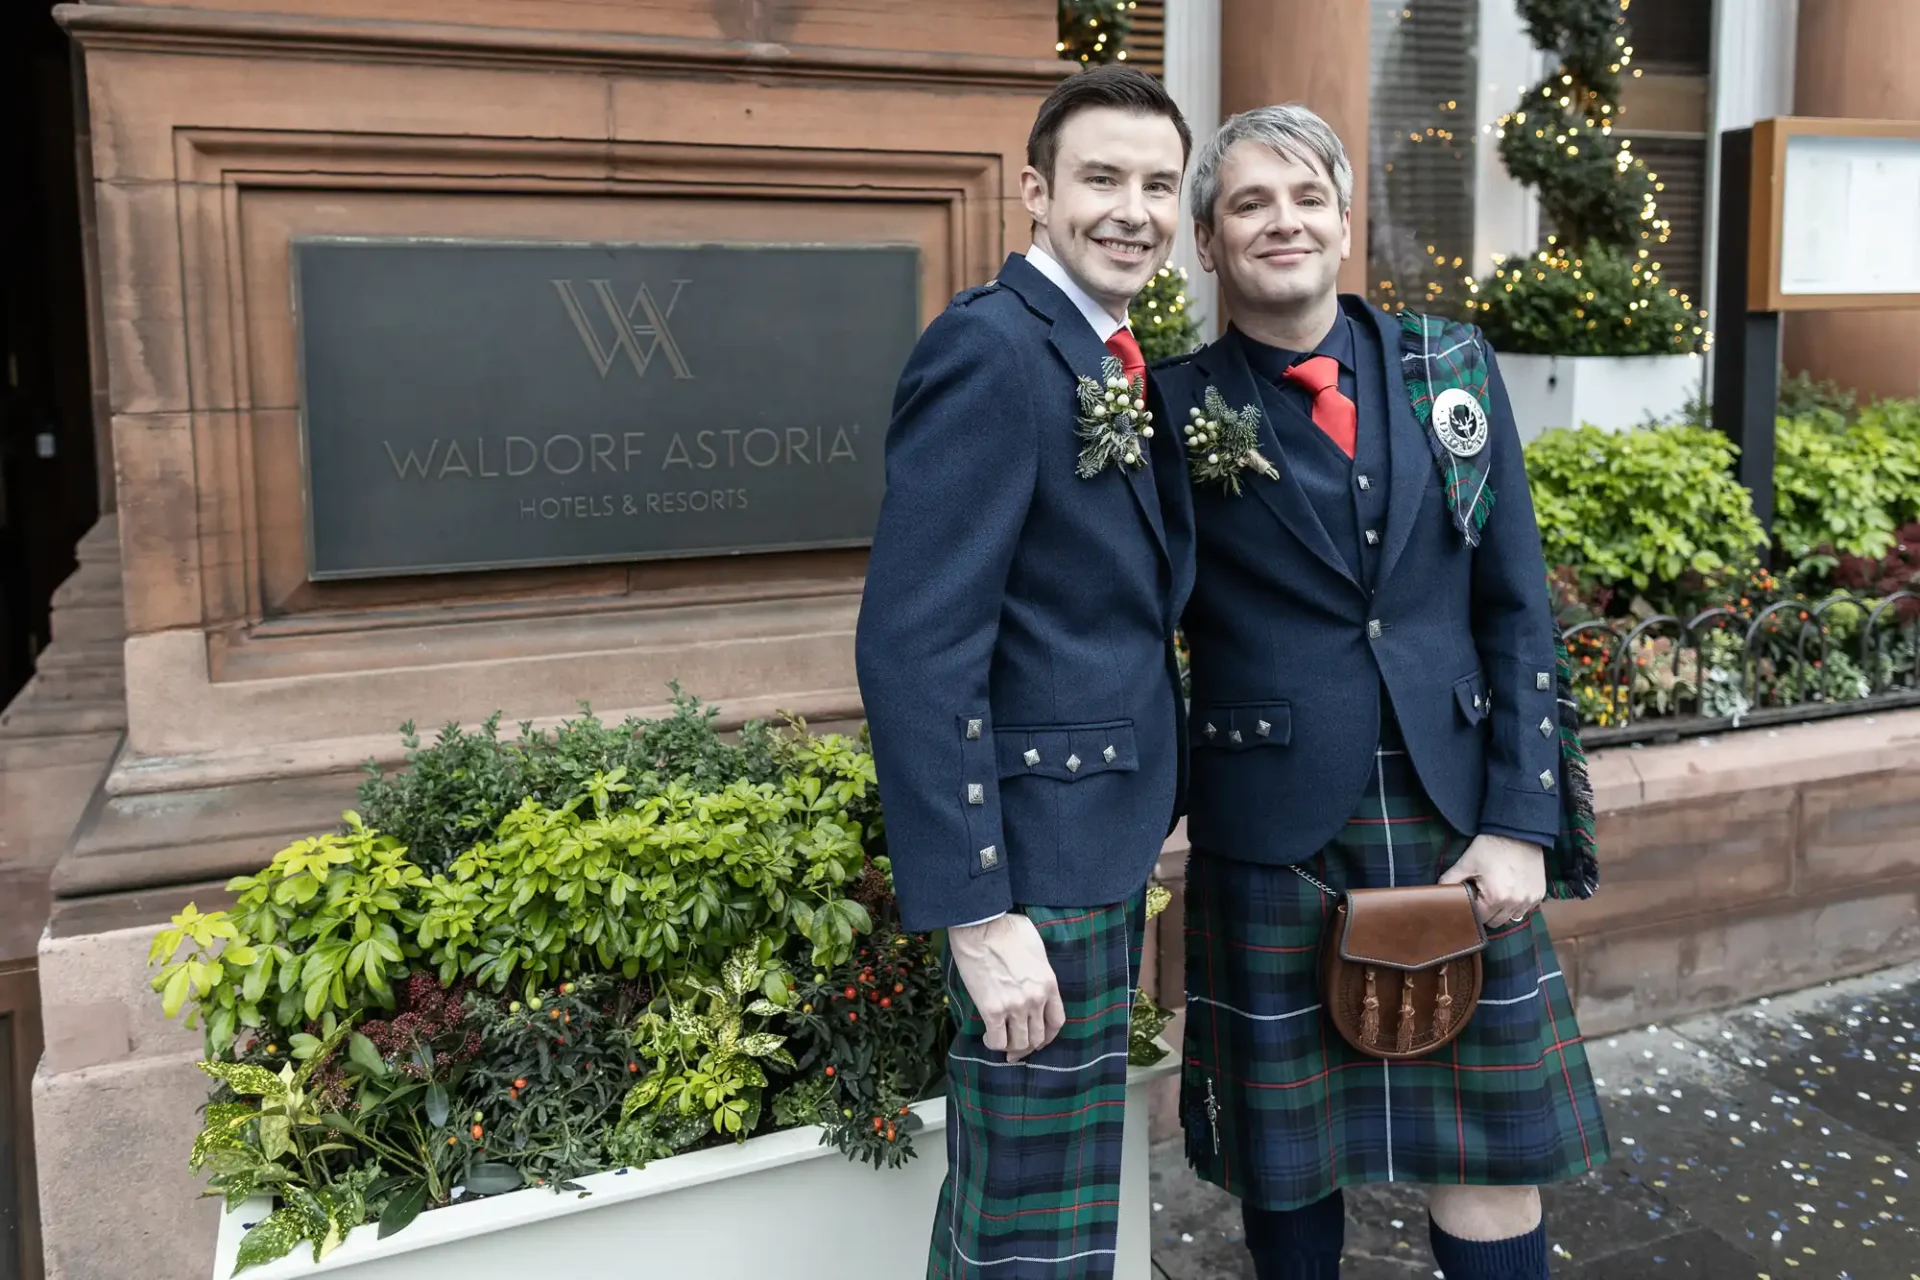 Two men wearing traditional Scottish kilts stand side by side smiling outside the Waldorf Astoria hotel, with festive decorations in the background.